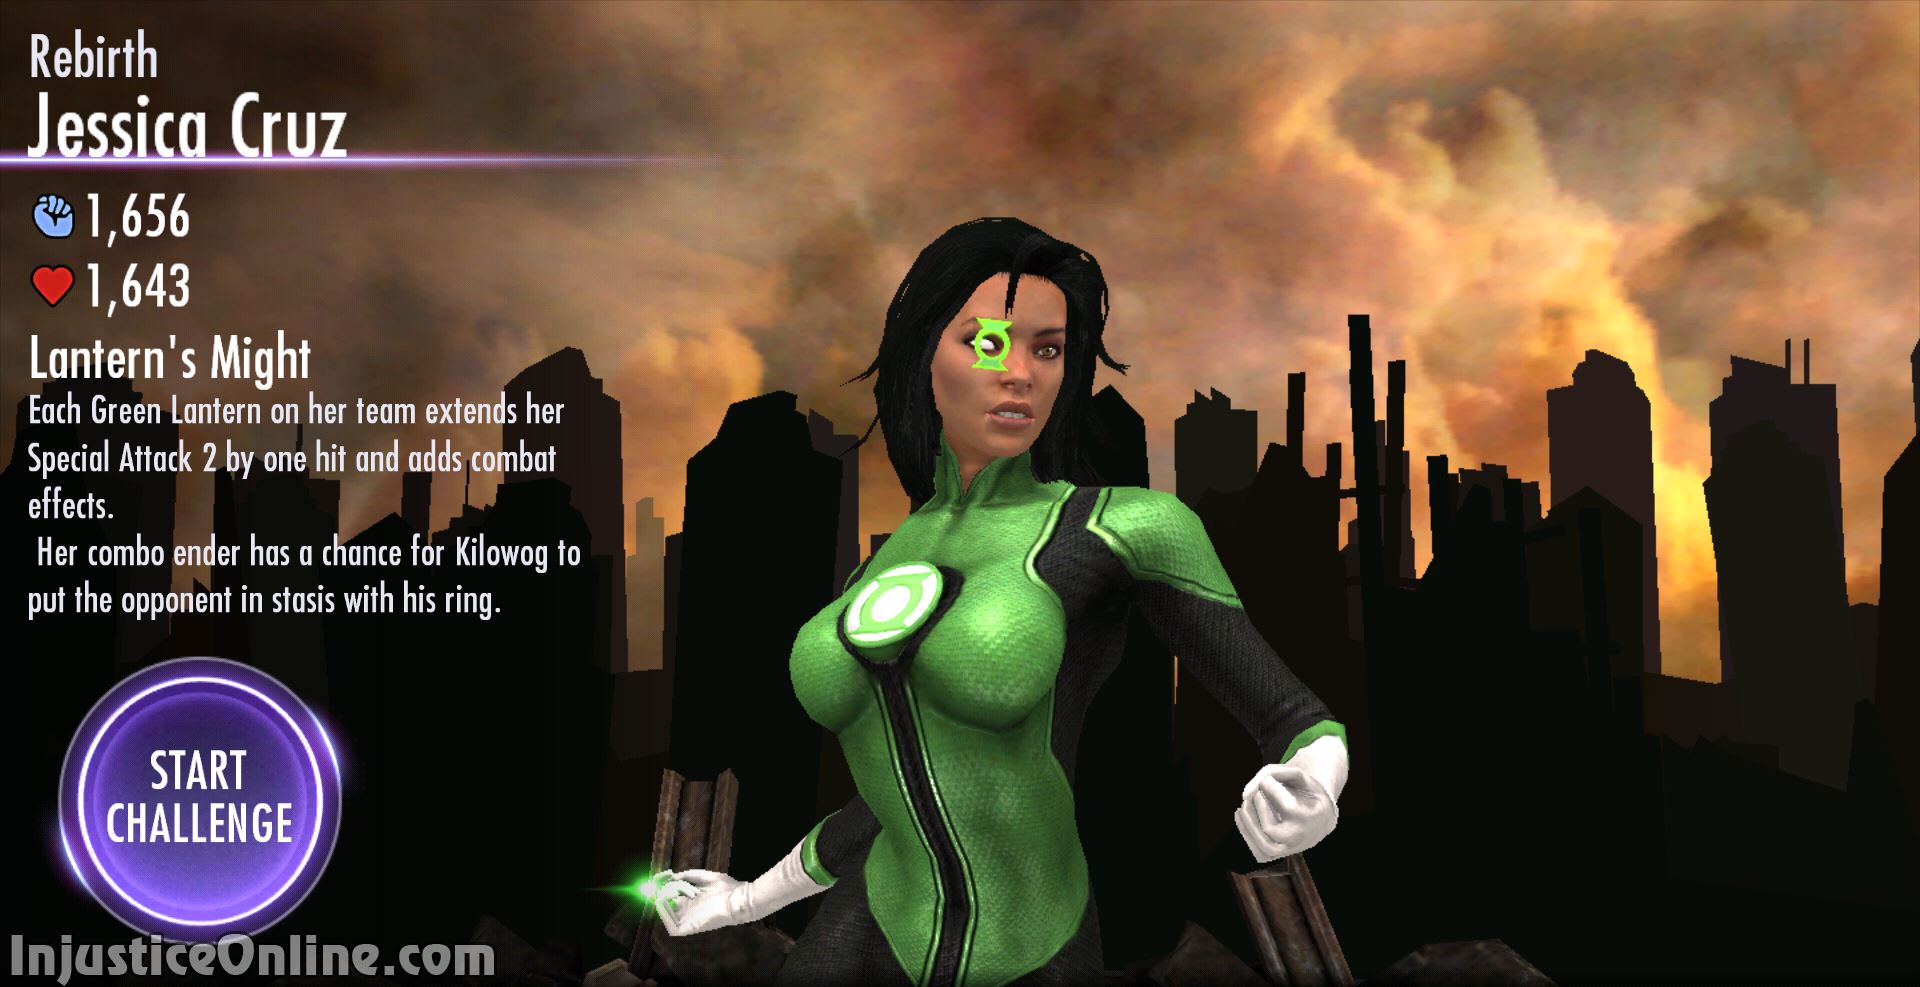 Rebirth Jessica Cruz is the first female variation of Green Lantern in the ...